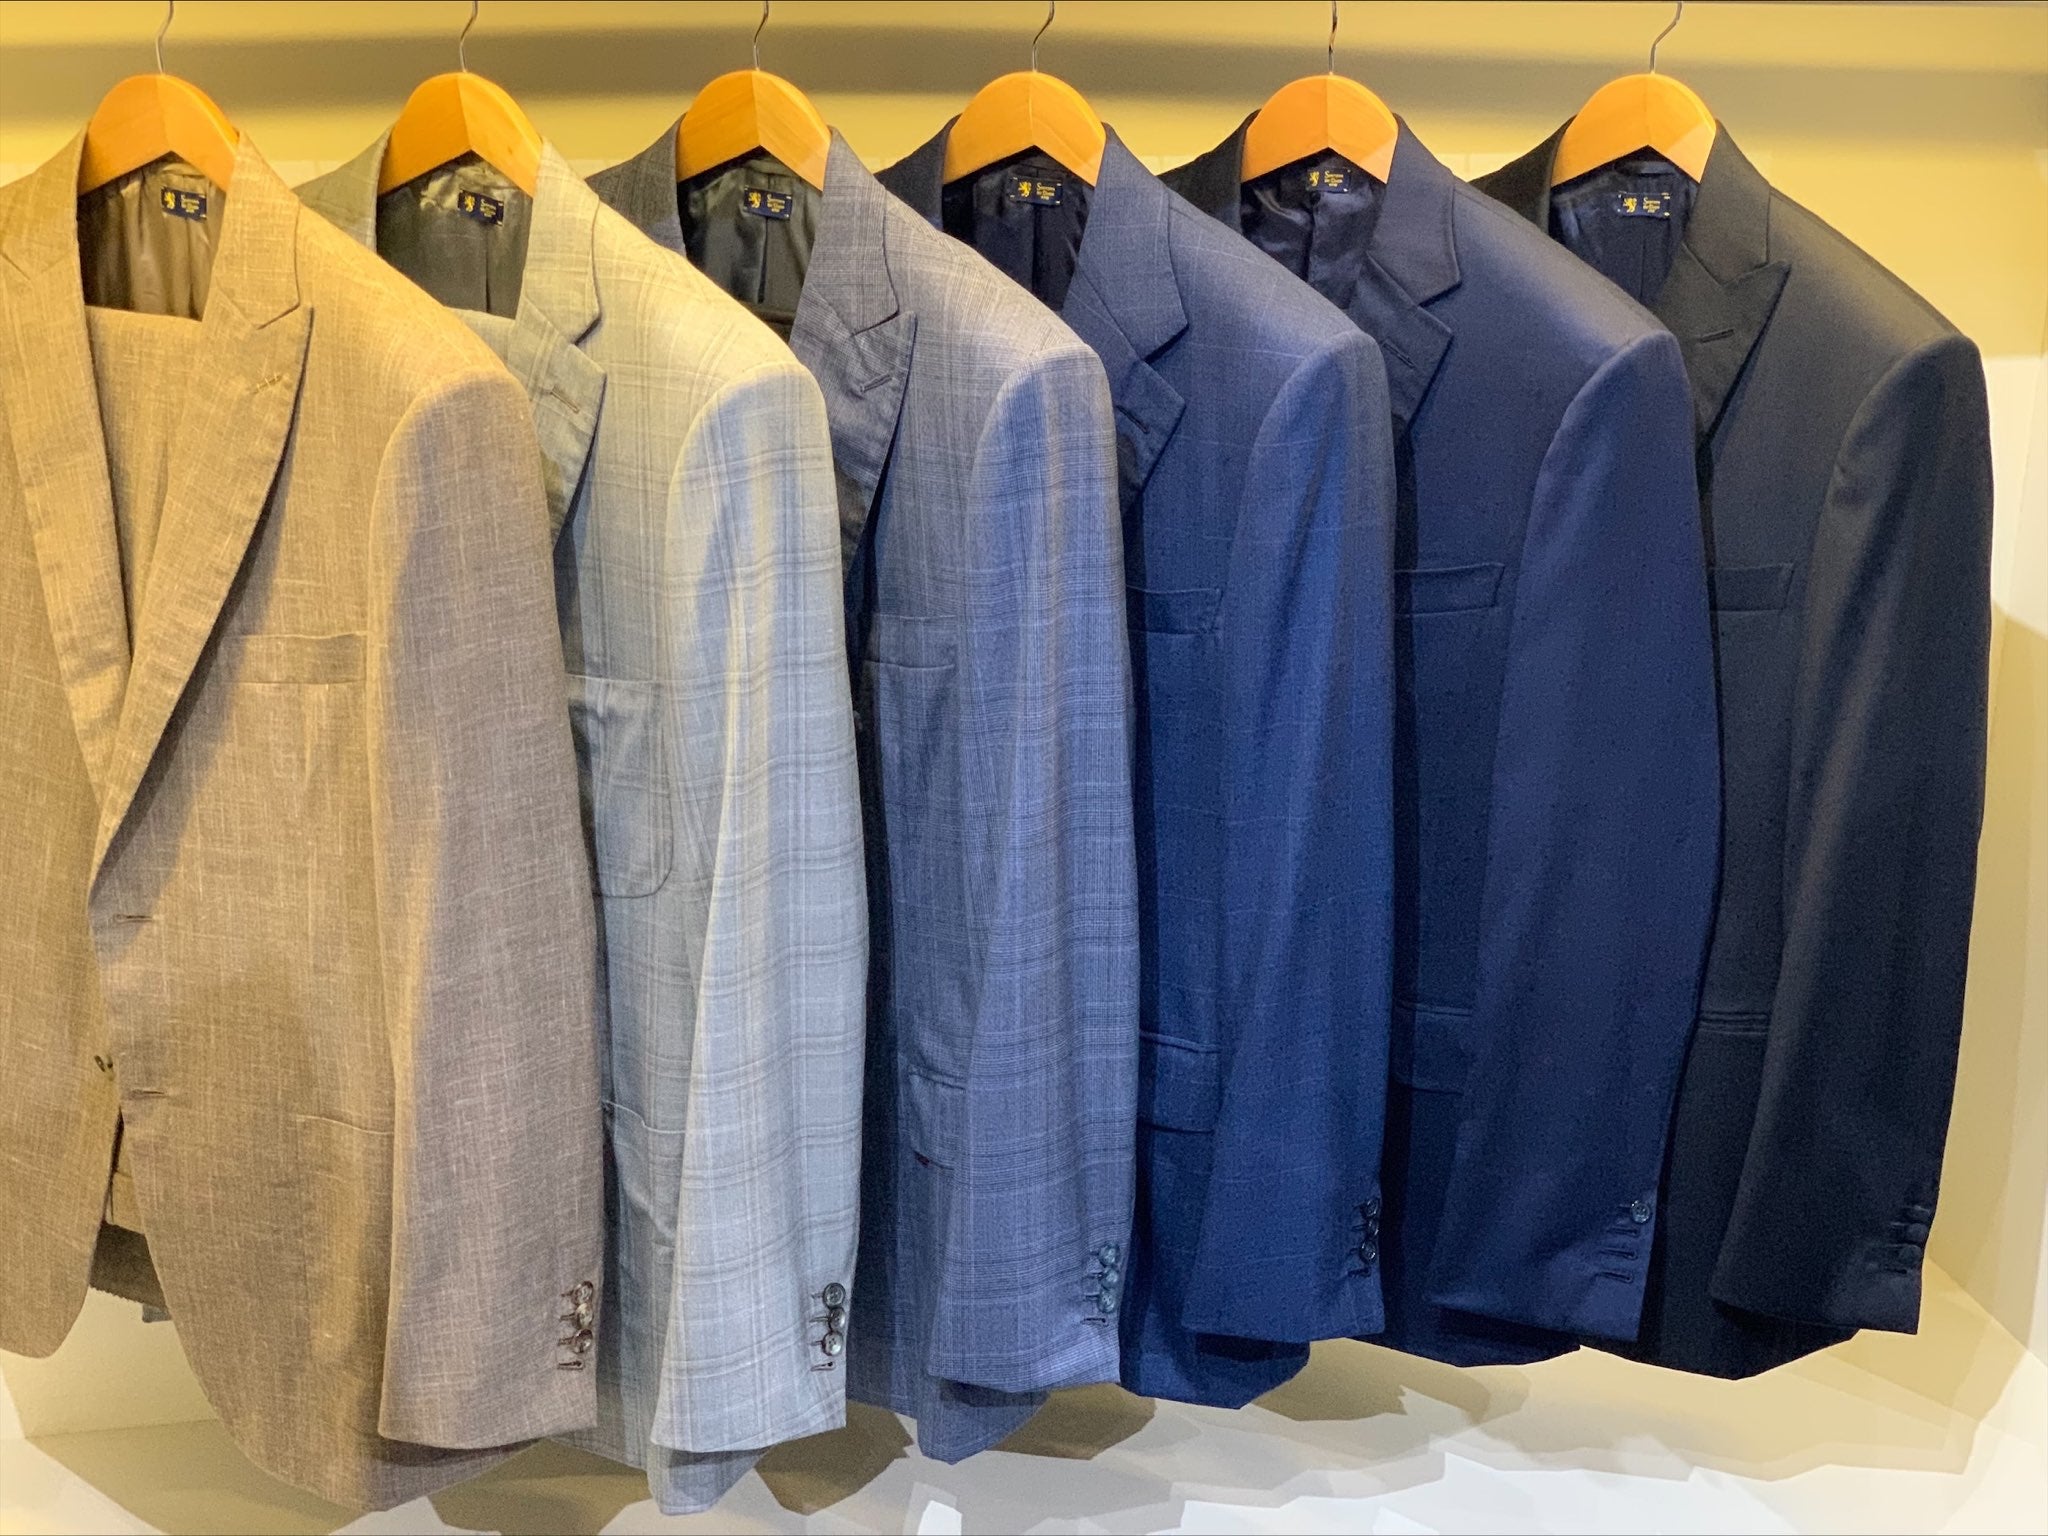 Each Sartoria Dei Duchi suit is tailored individually by our master Italian tailor using the finest wool with great consideration on timeless style deeply embedded in the refined Italians and combining it with the art of modern tailoring.